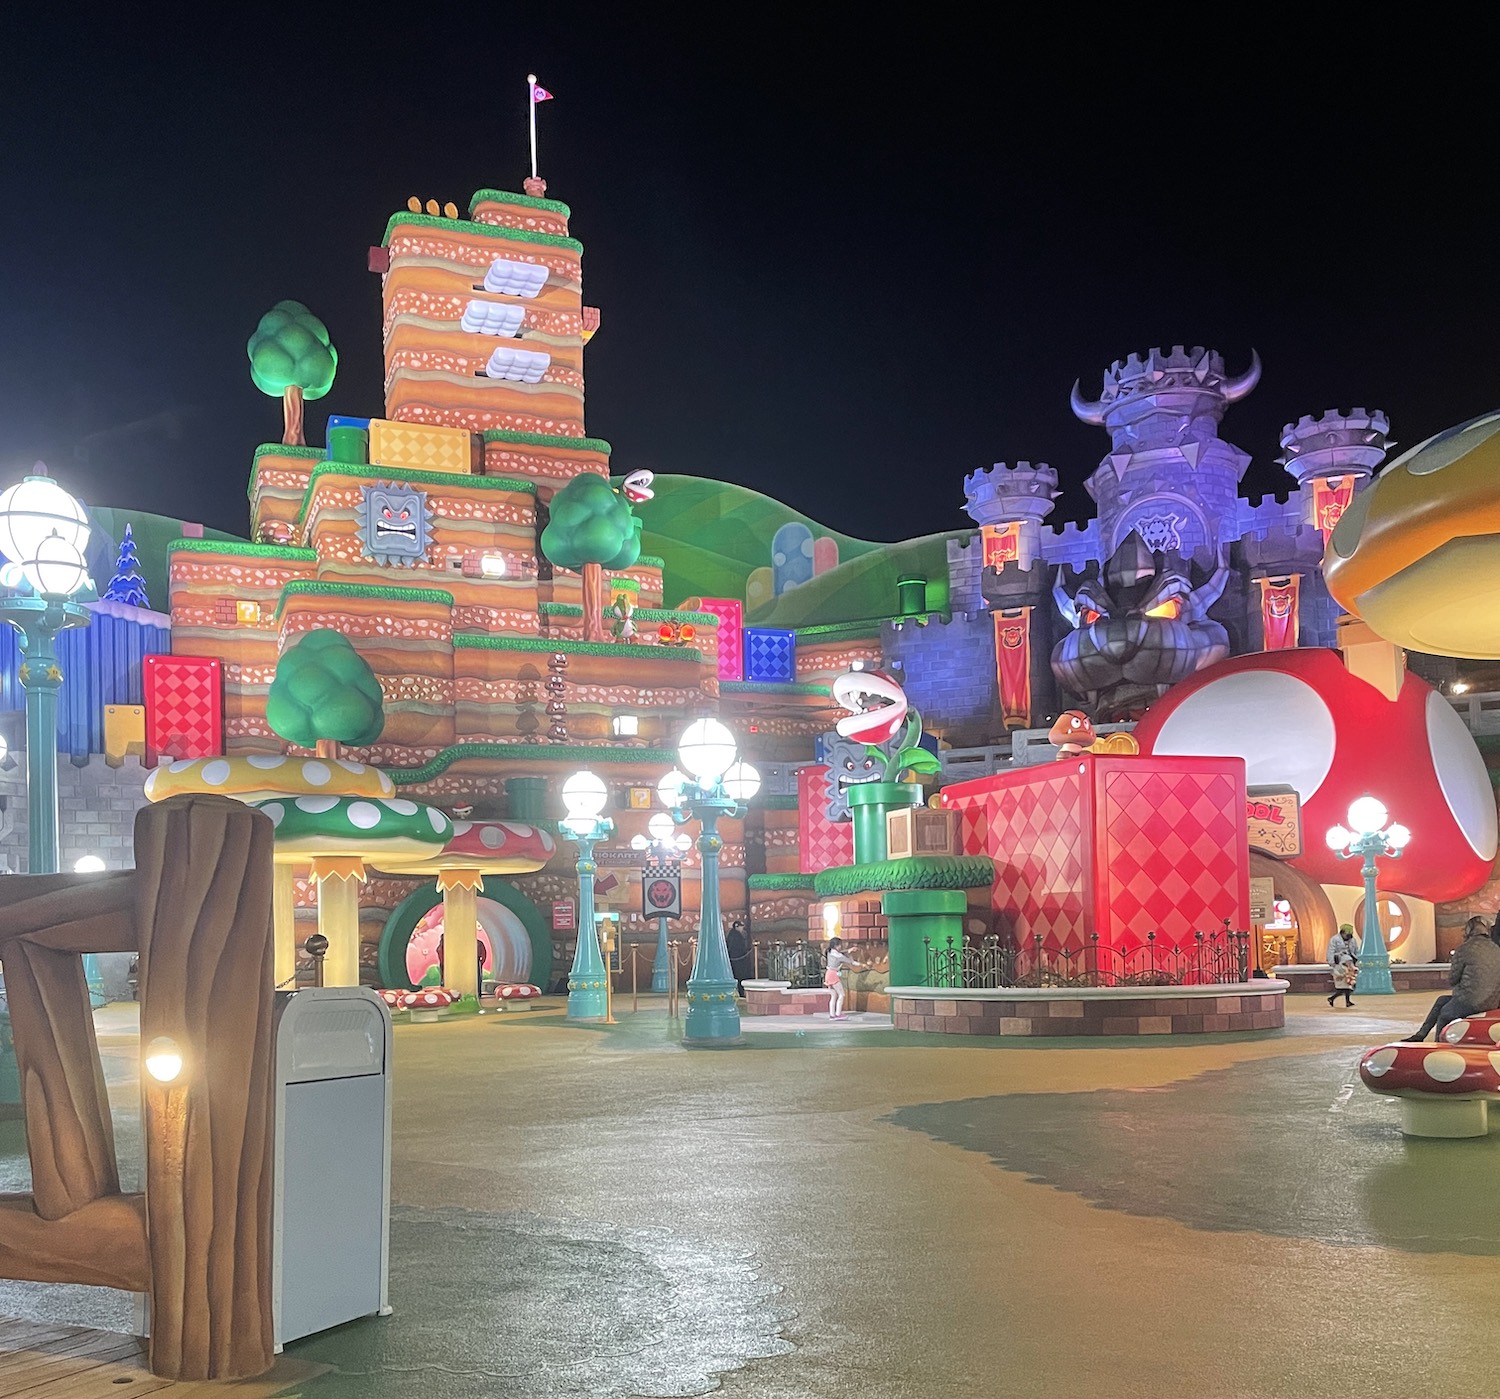 One of the big set pieces at Super Nintendo World at night. We see Bowser's castle, a big piranha plant, and a tall mountain covered with moving platforms and a flag at the top.